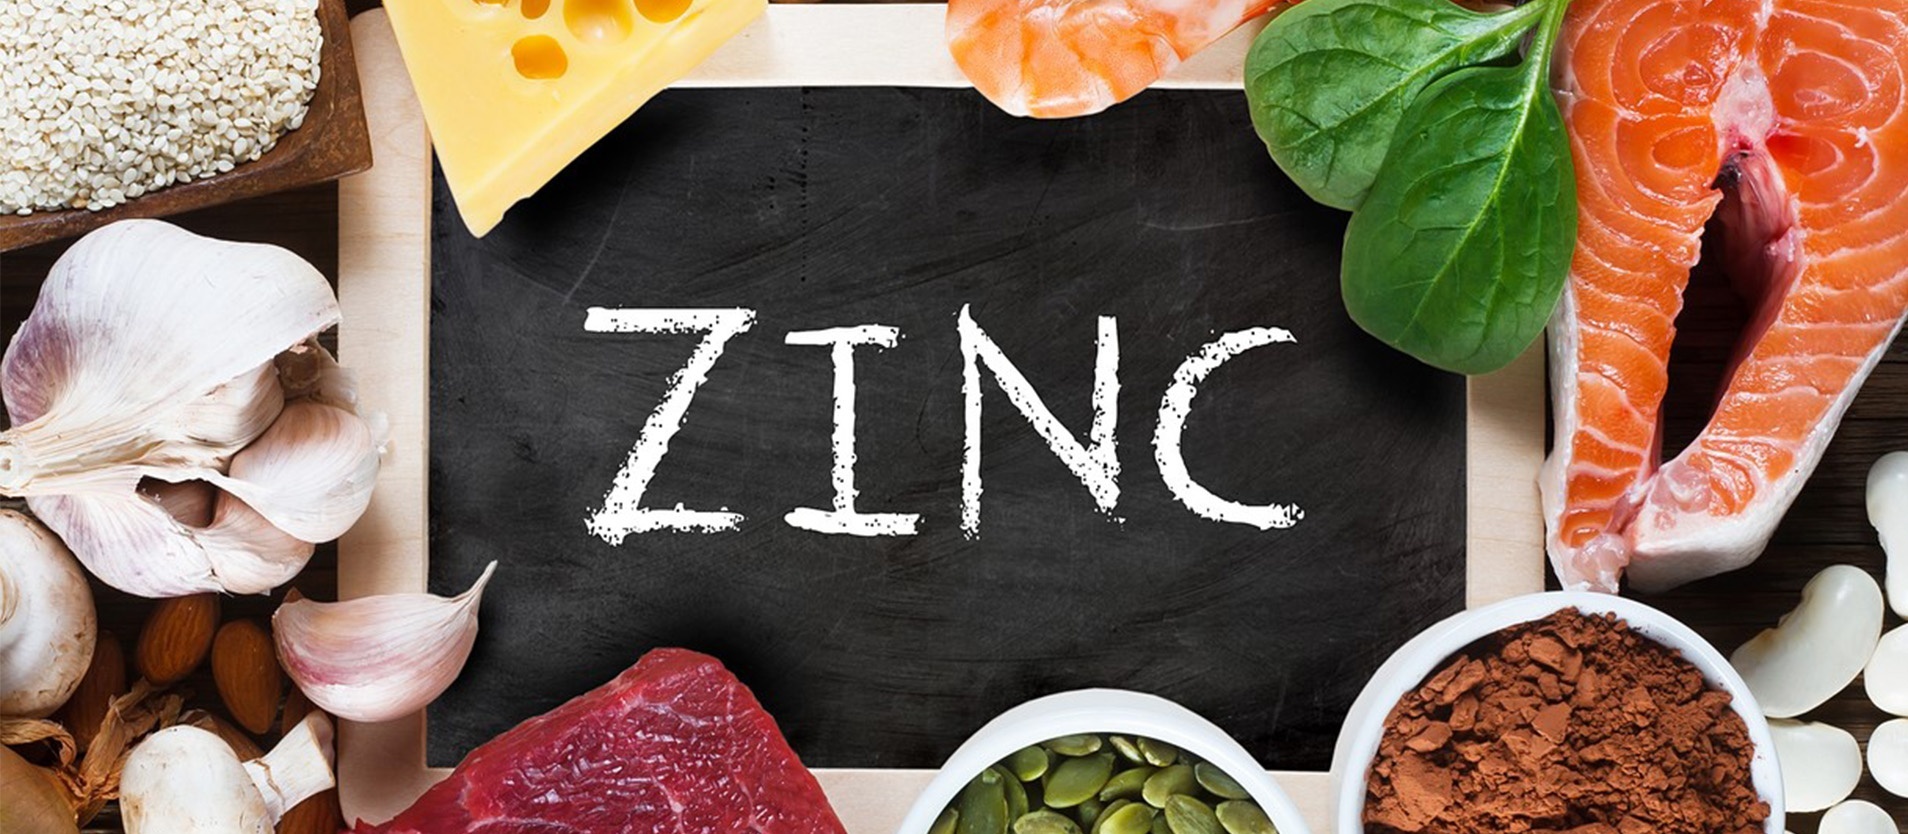 Foods Rich in Zinc, B Vitamins, and Iron That May Help Boost Hair Growth